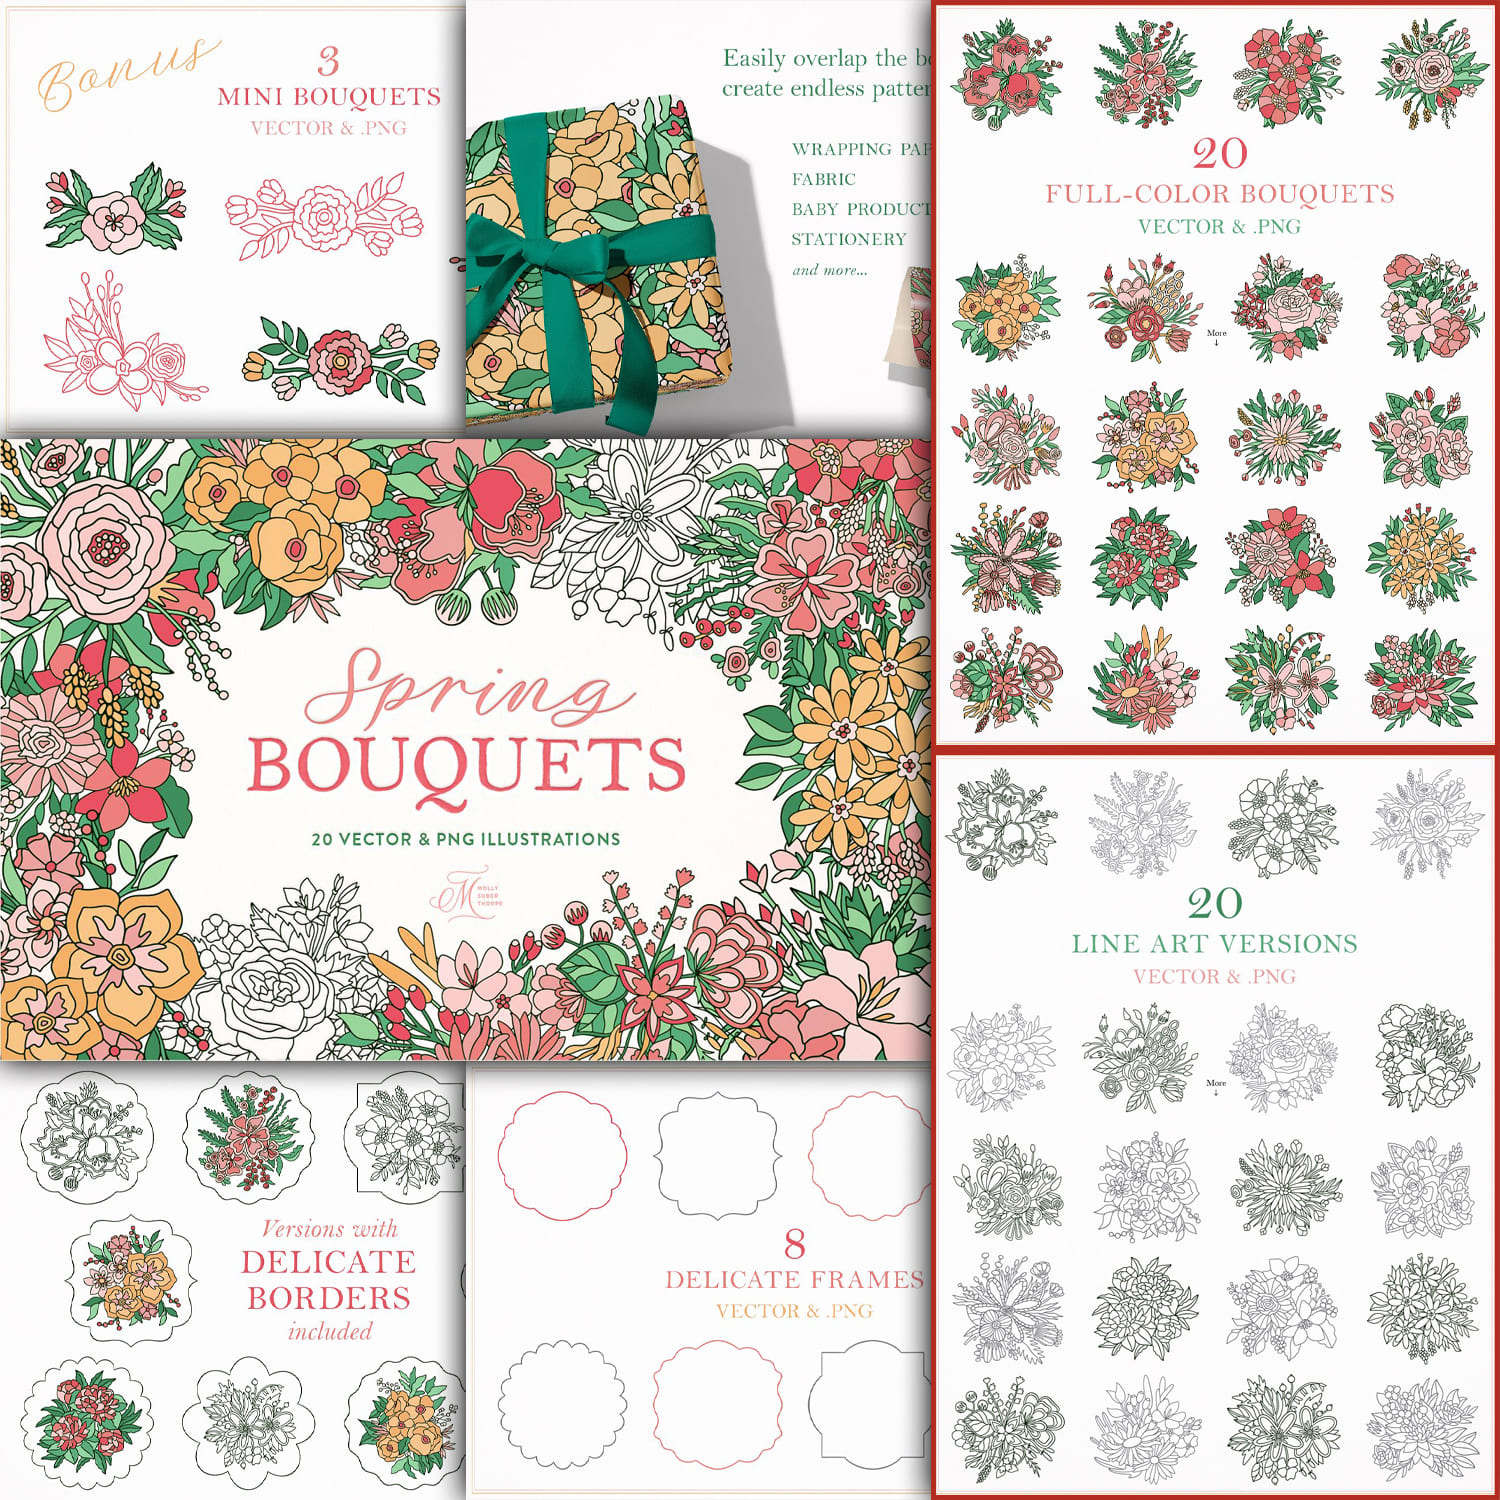 Spring Bouquets Vector Collection cover.